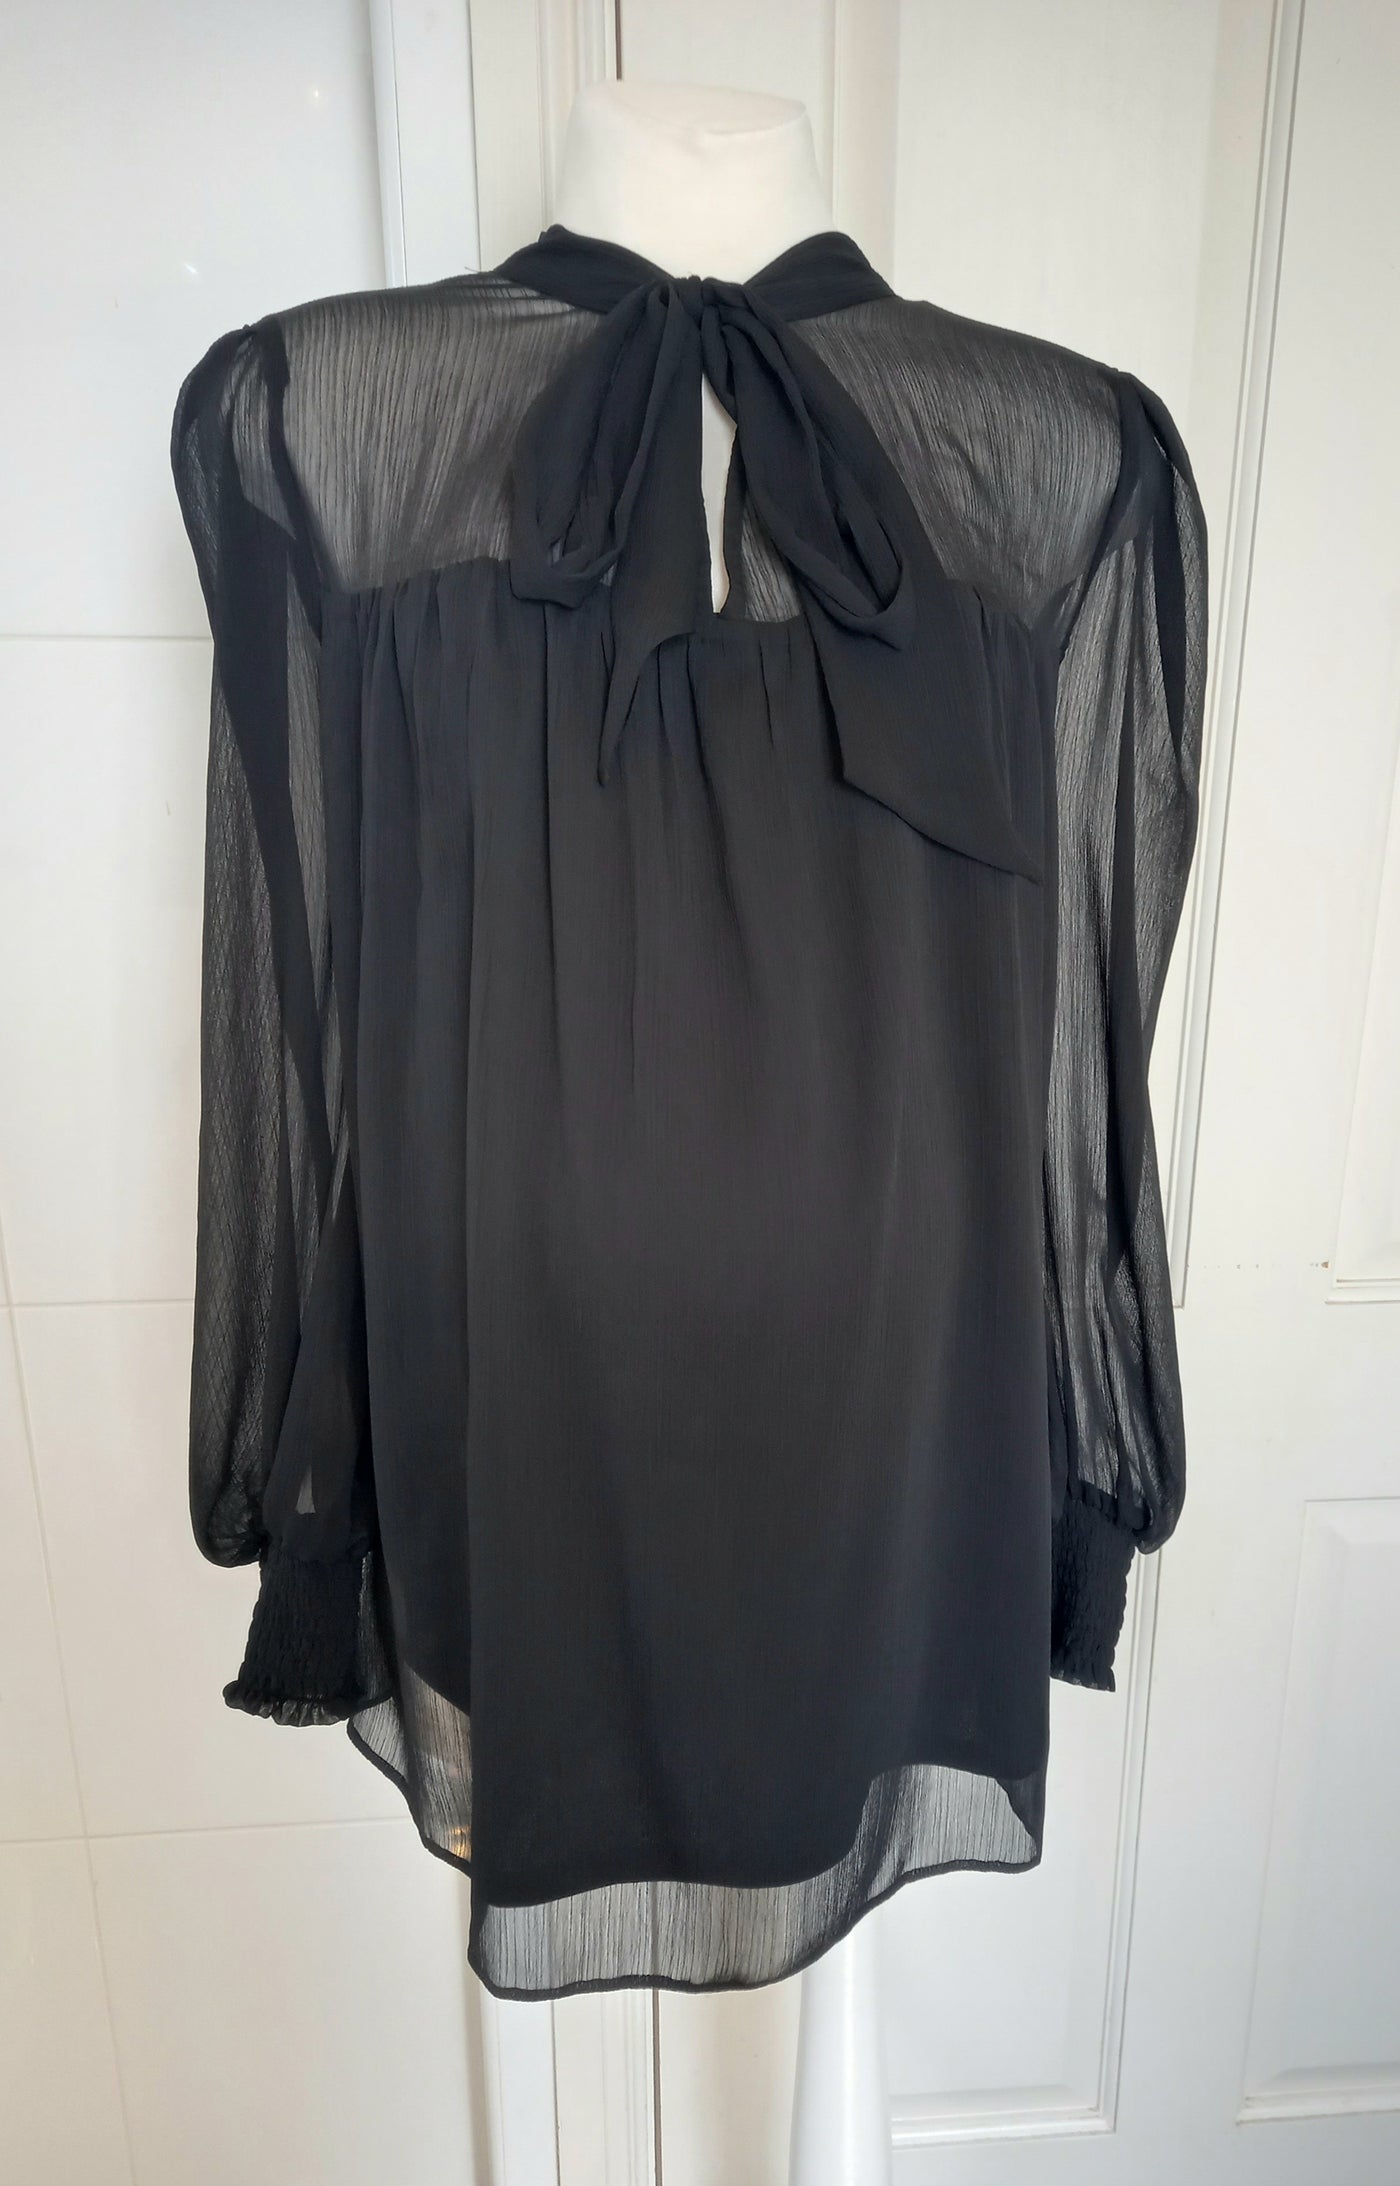 Dorothy Perkins Black Top with Neck Tie (BNWT) - Size 22